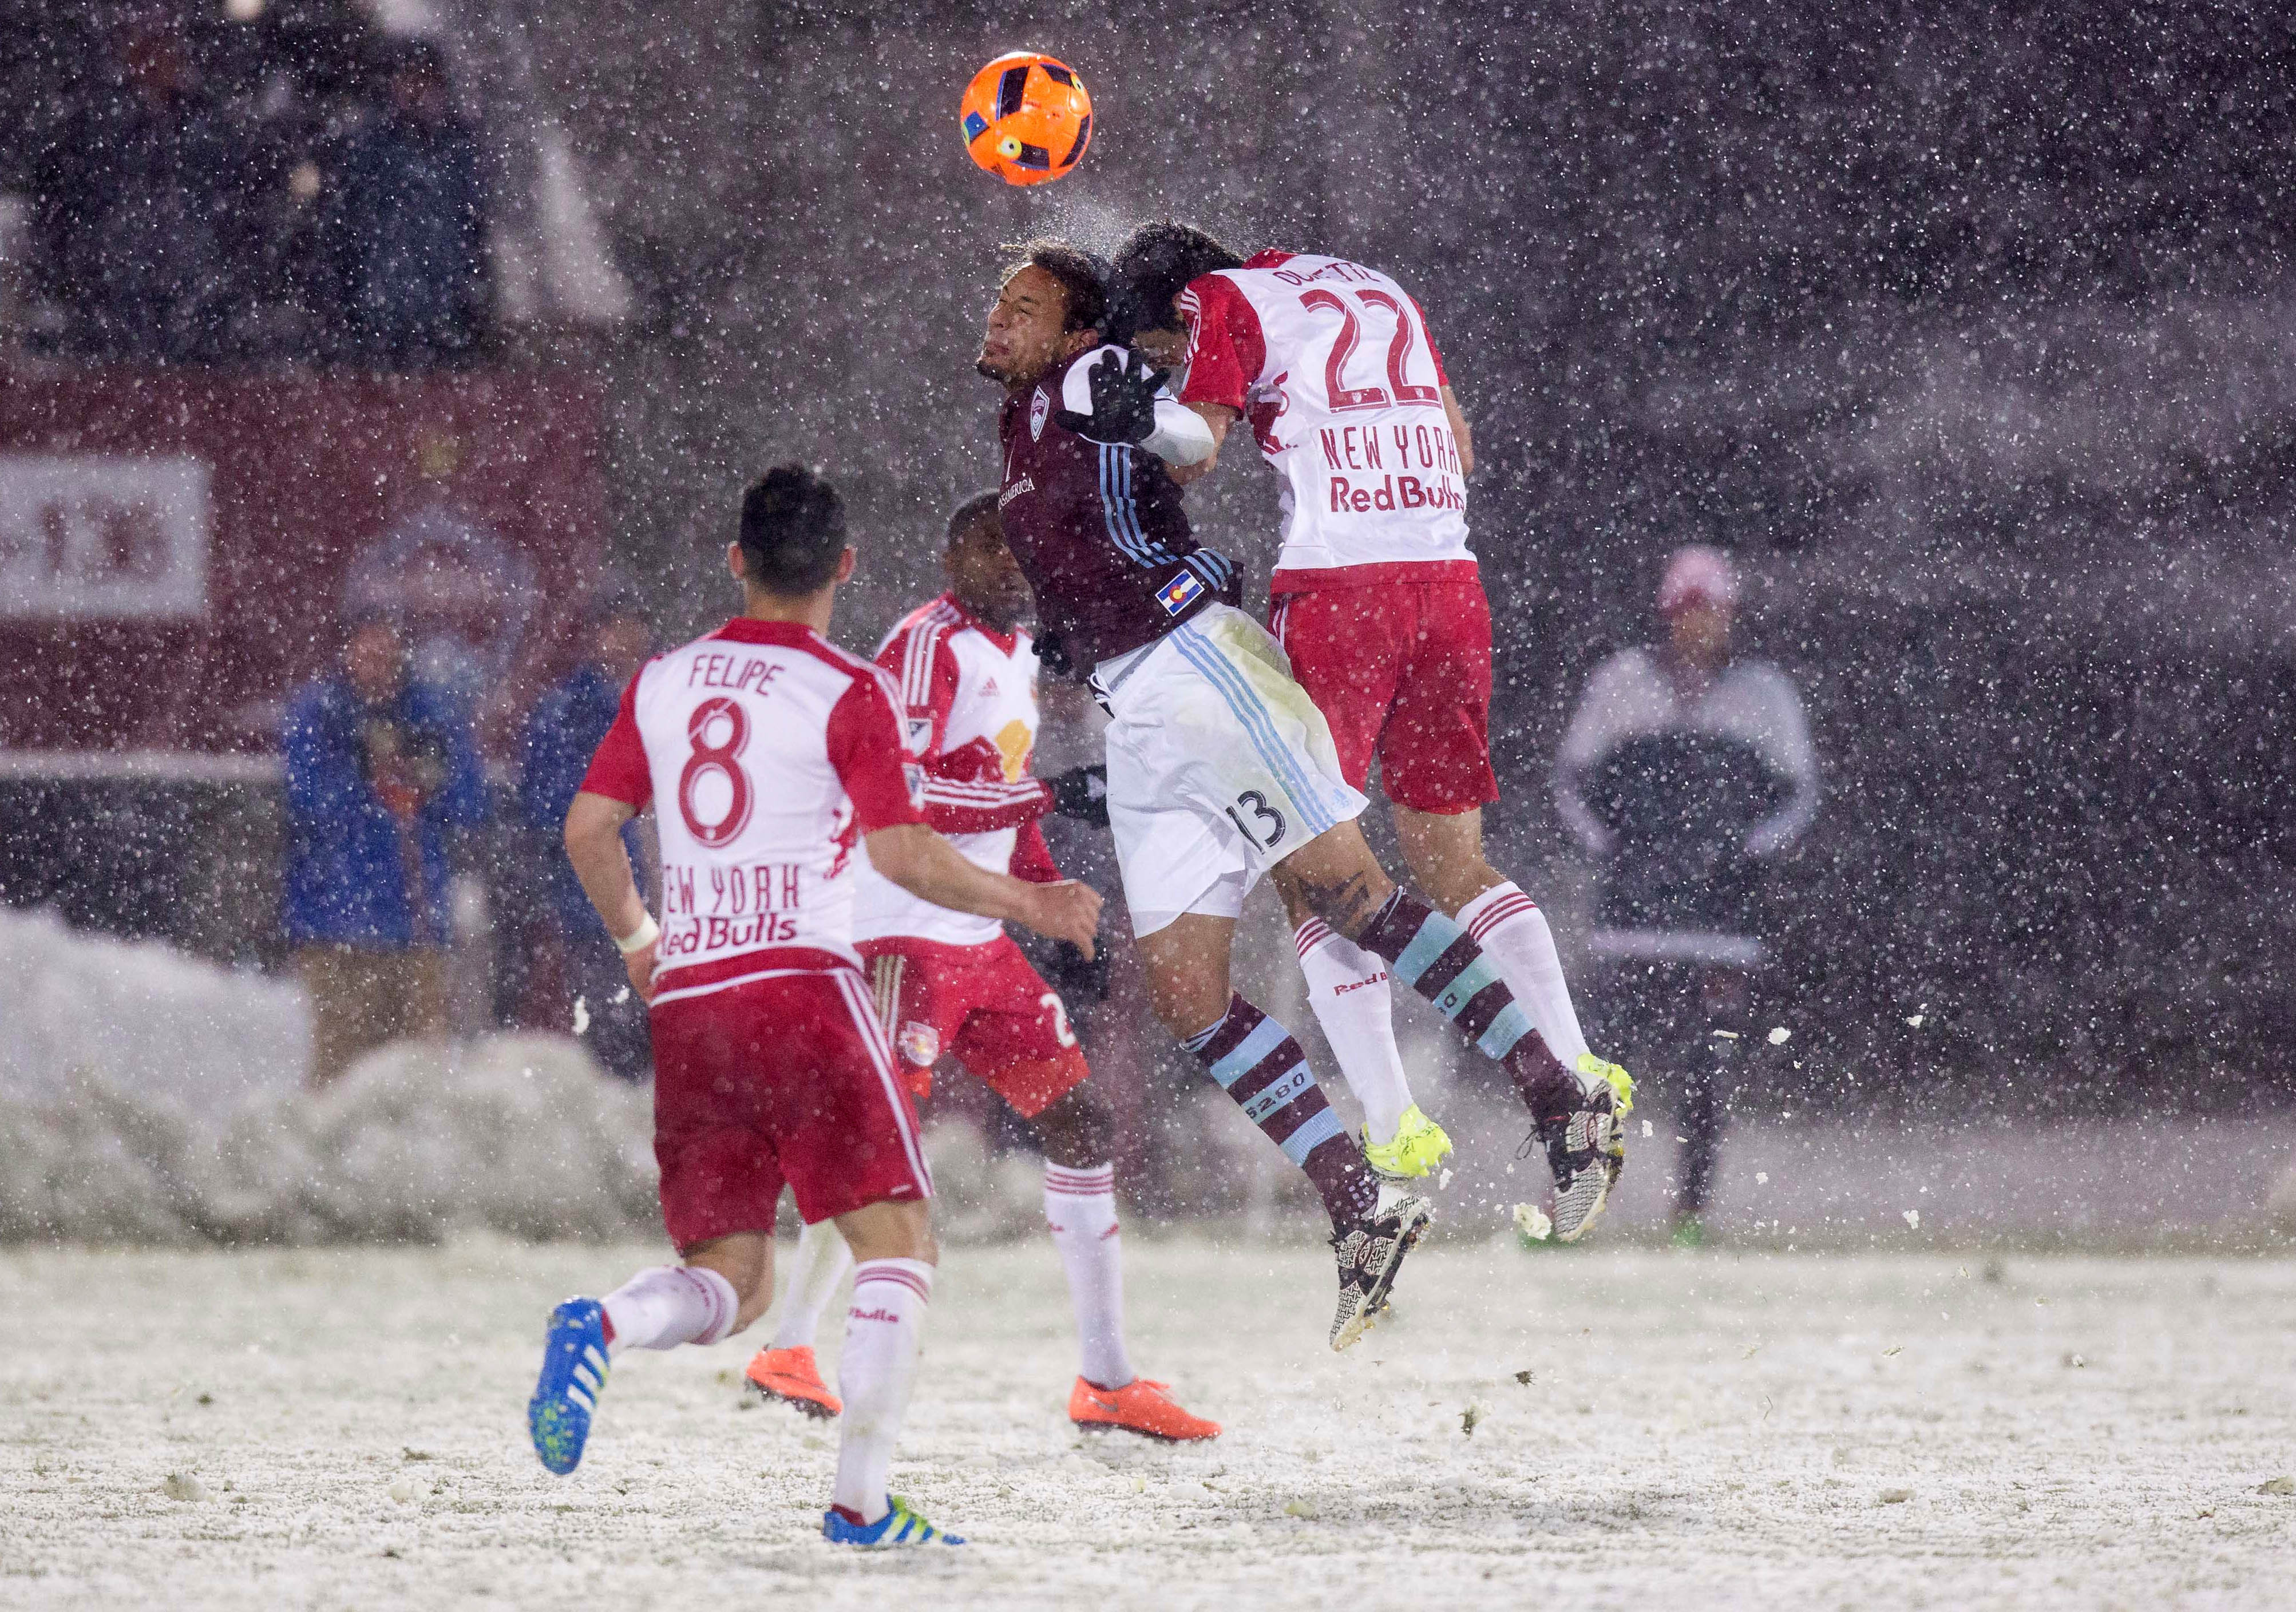 Jermaine Jones goes up for a header against Kari Ouimette in Snoclassico2.